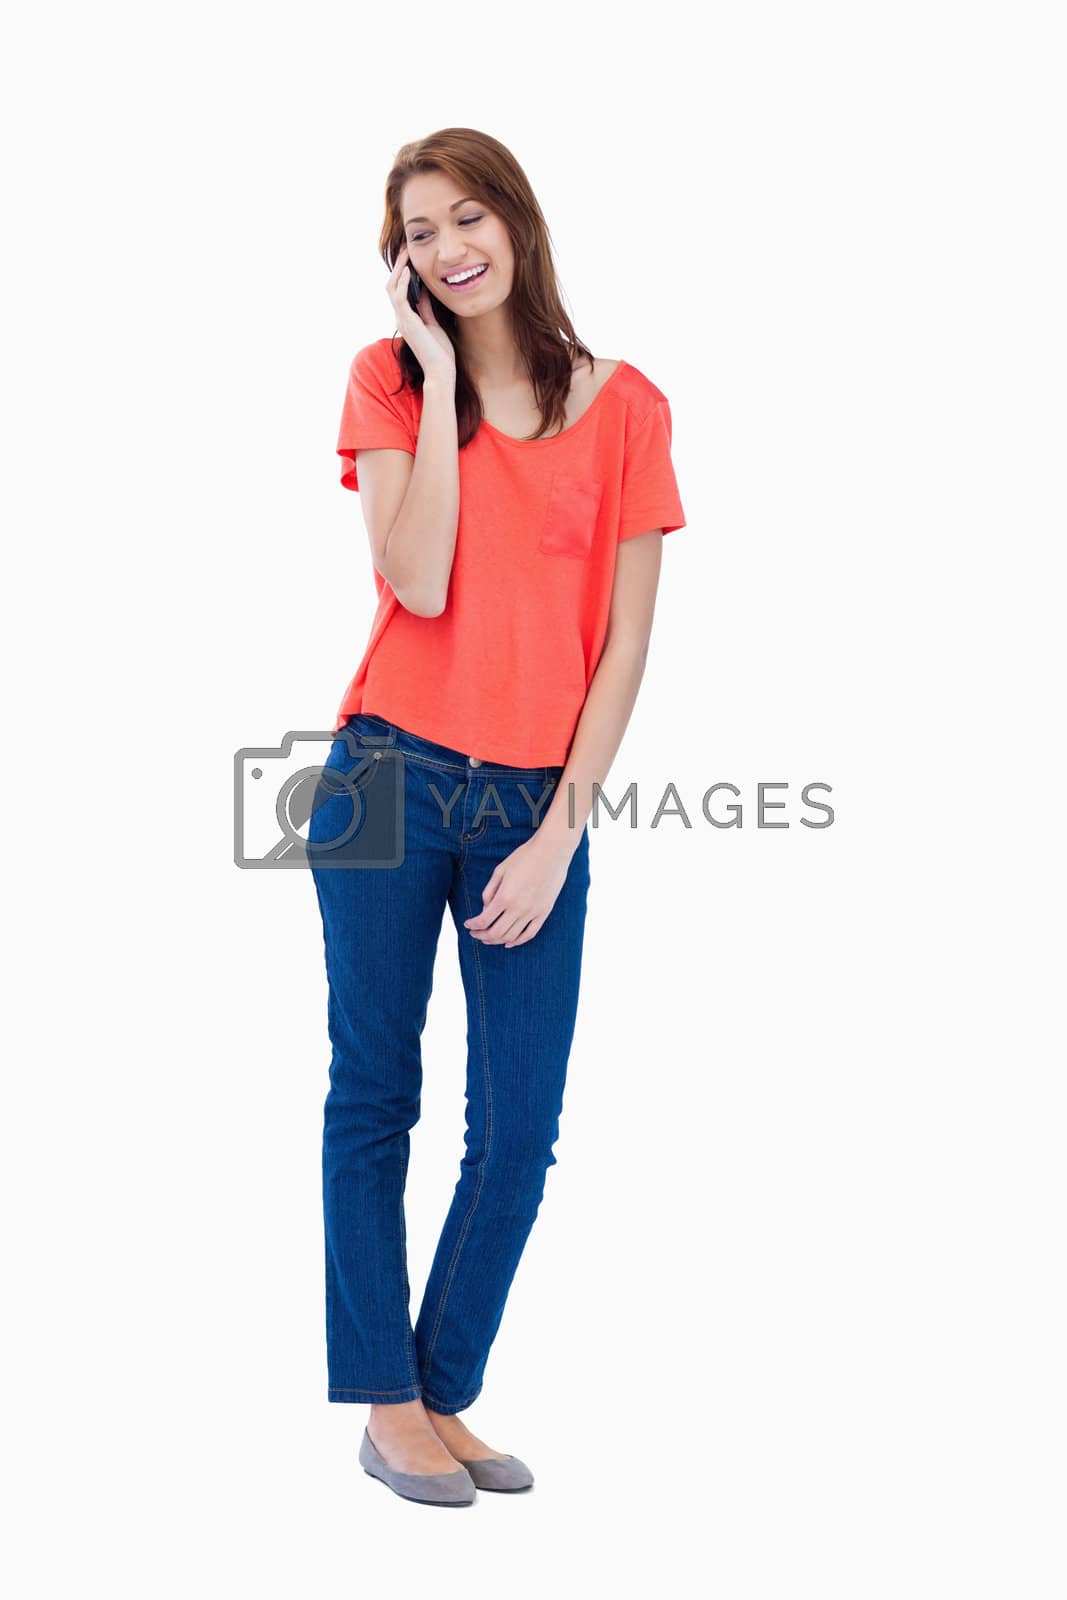 Royalty free image of Relaxed teenager smiling while talking on the phone by Wavebreakmedia